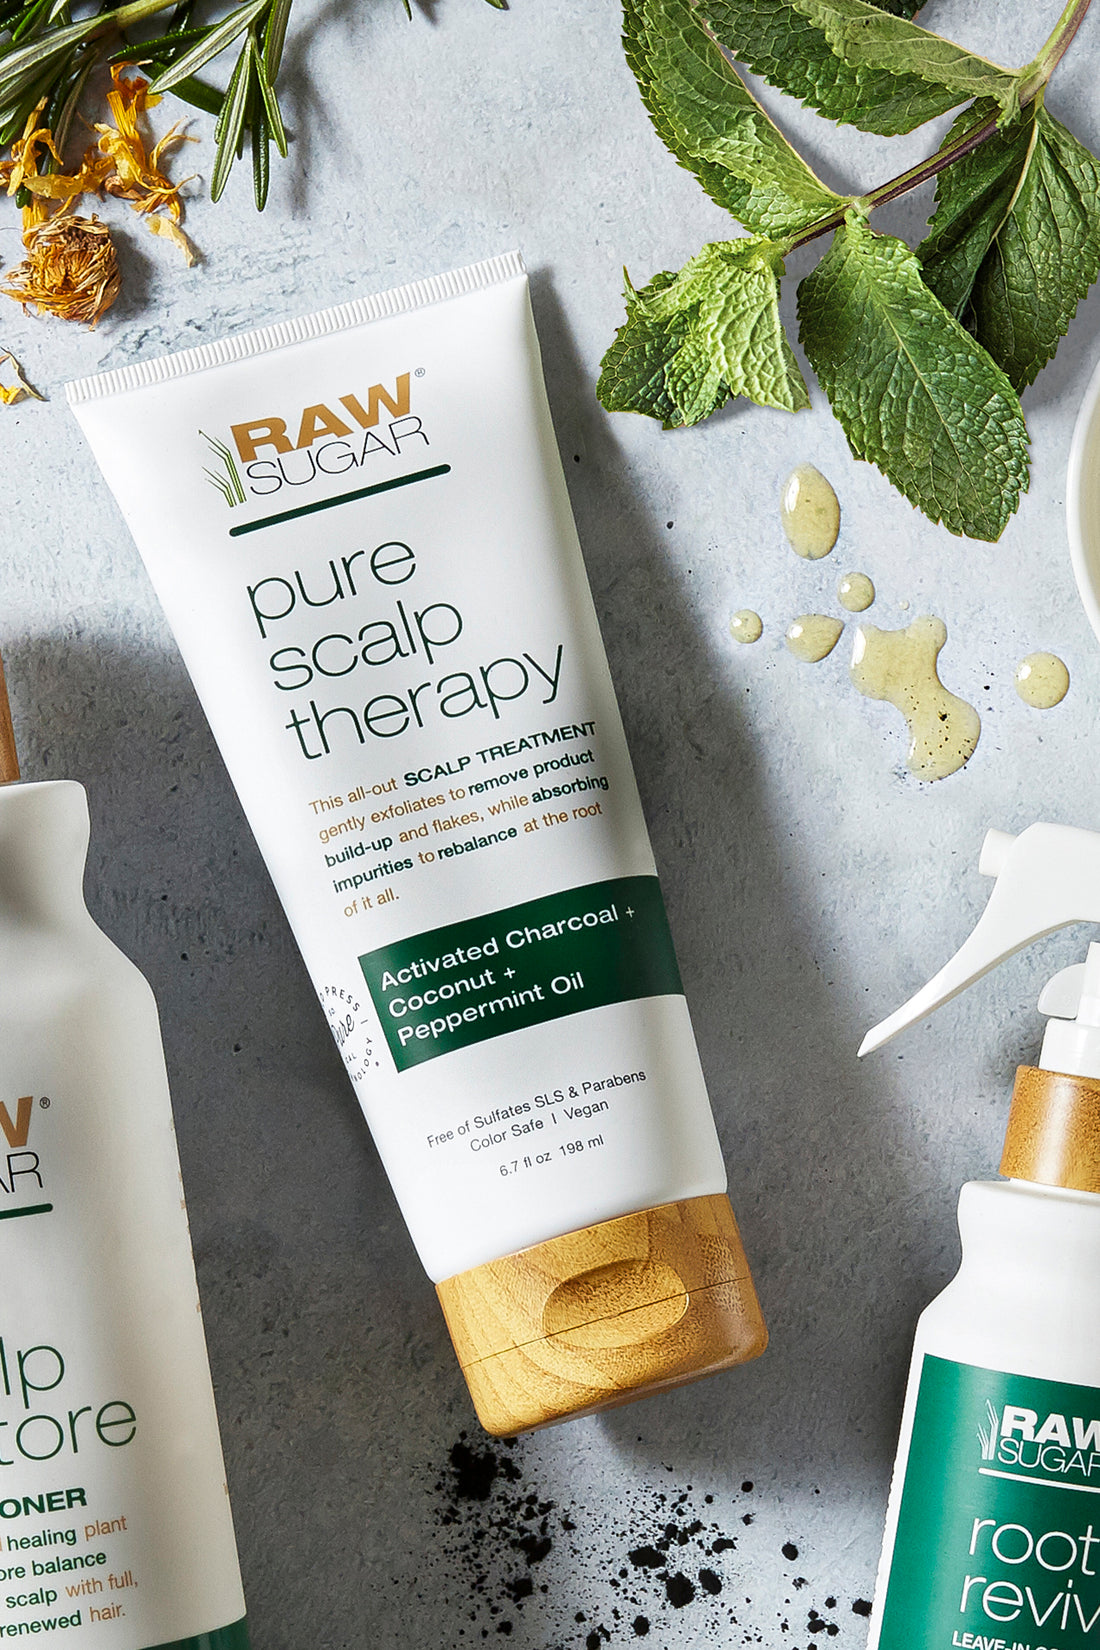 Raw Sugar Pure Scalp therapy tube lying next to fresh mint leaves, oil drops and partial photos of Root Revive and Scalp Restore